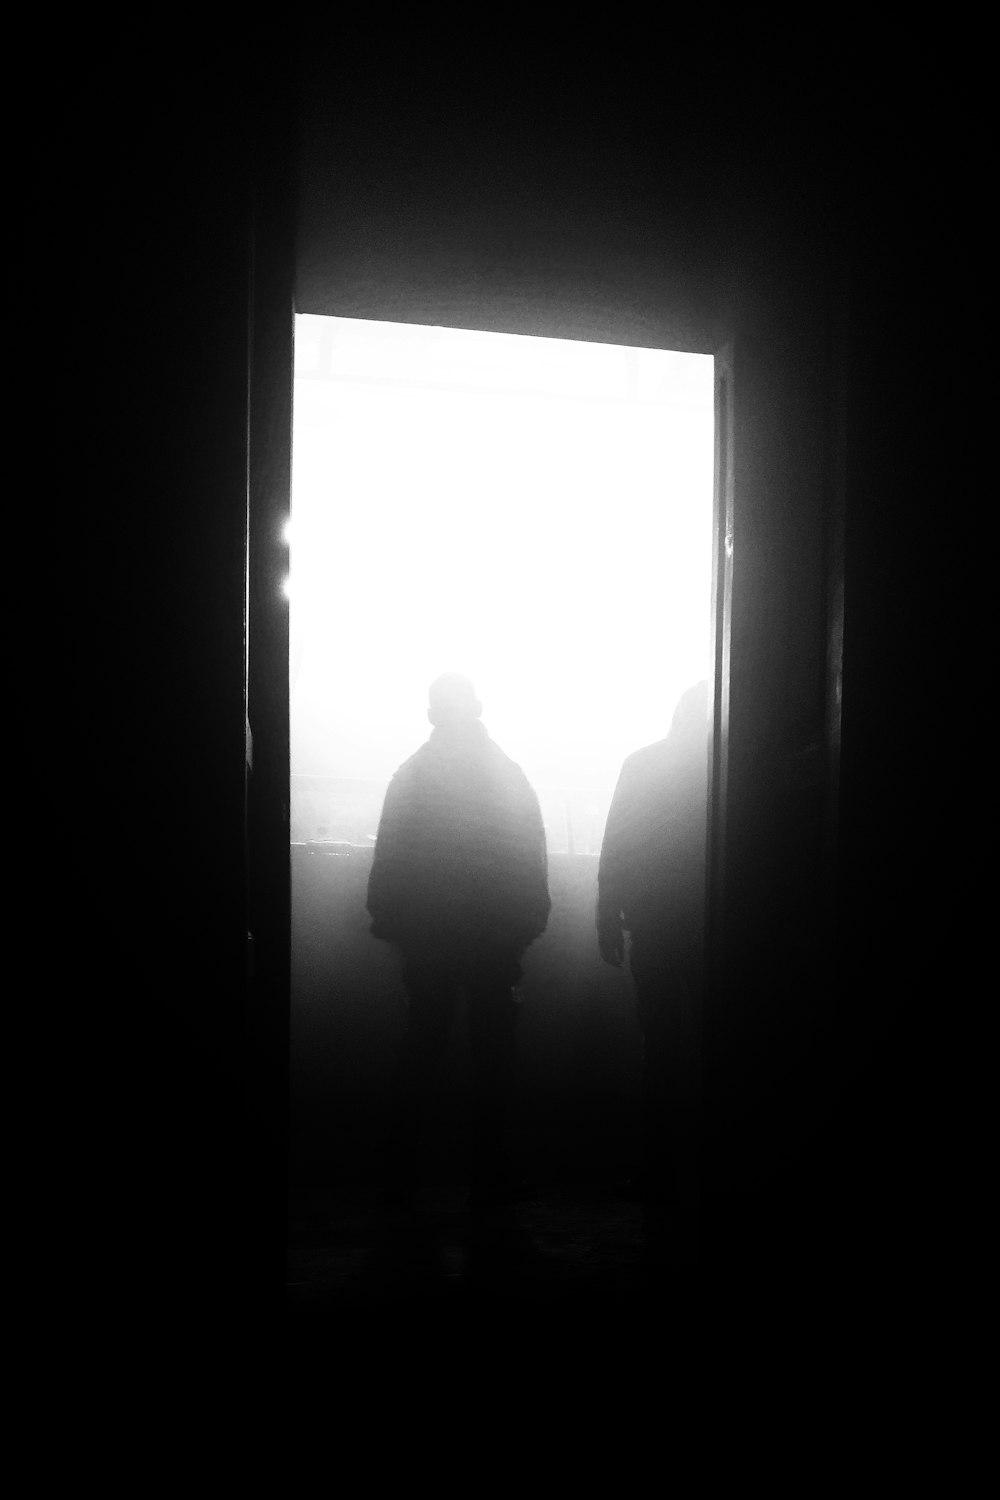 silhouette of man and woman standing in front of window